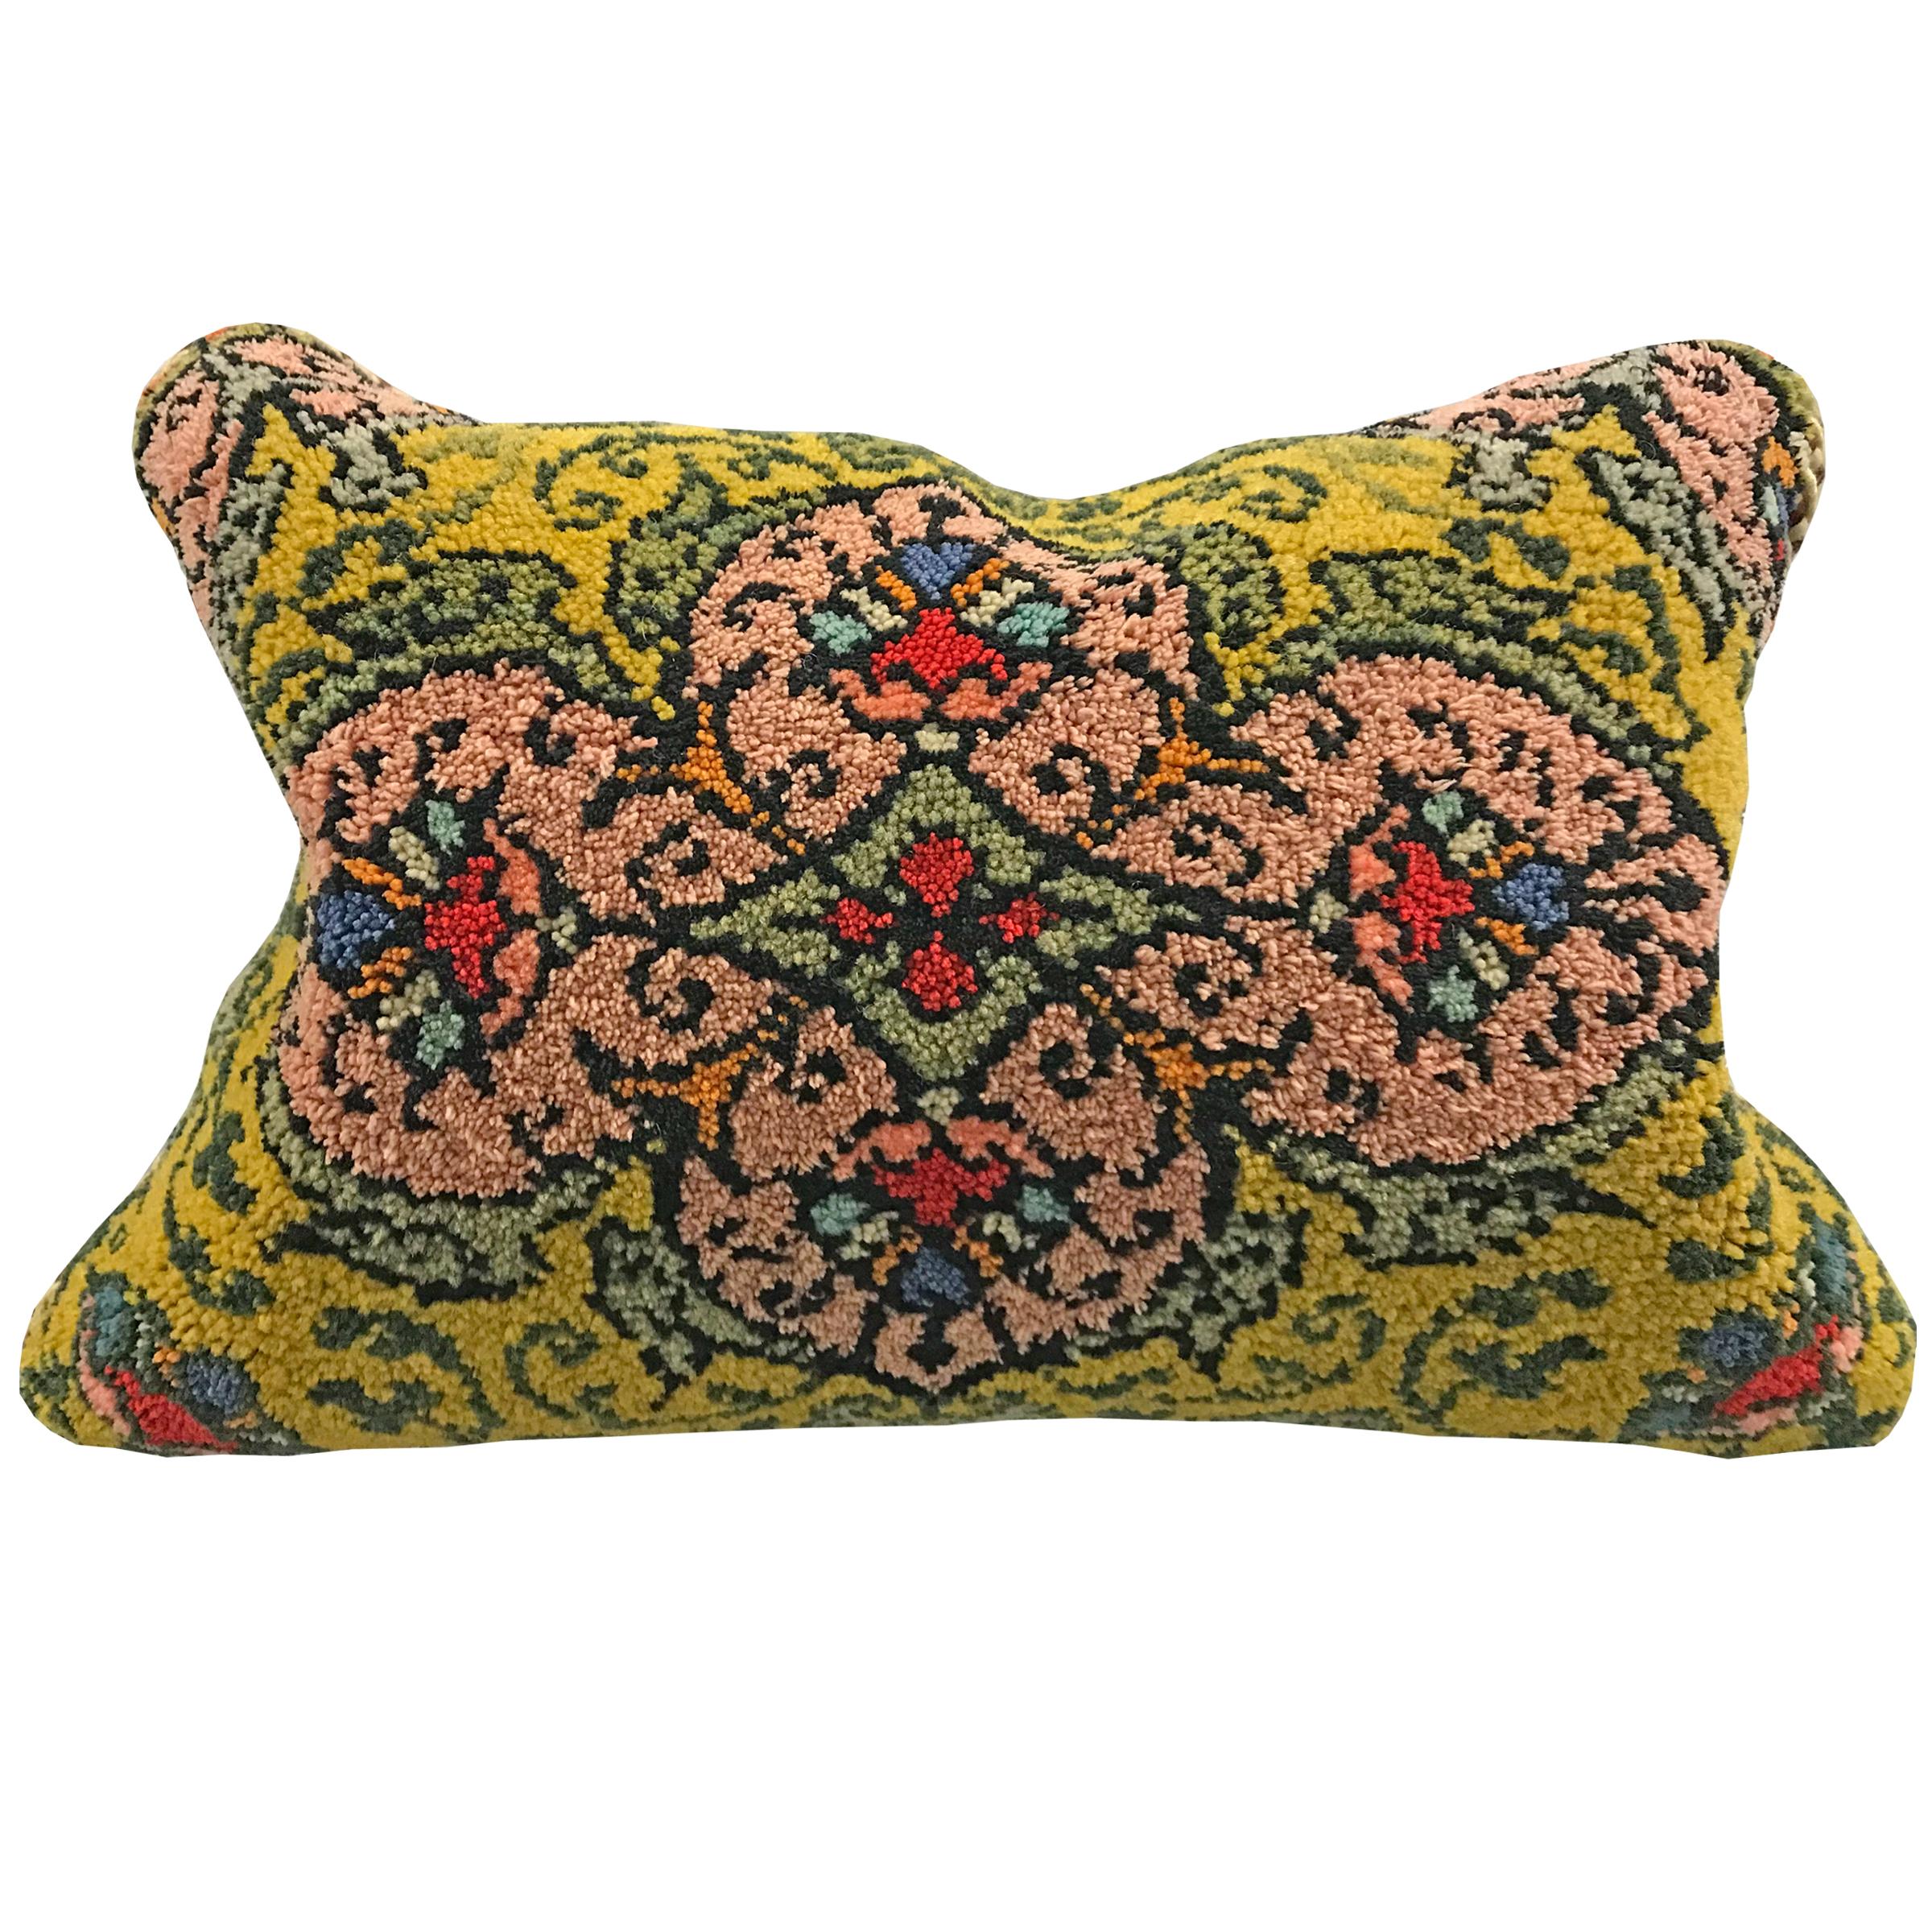 A pair of pillows made from early 20th century Hungarian finely executed hook rug Folk Art panels, backed with wool, and filled with down.